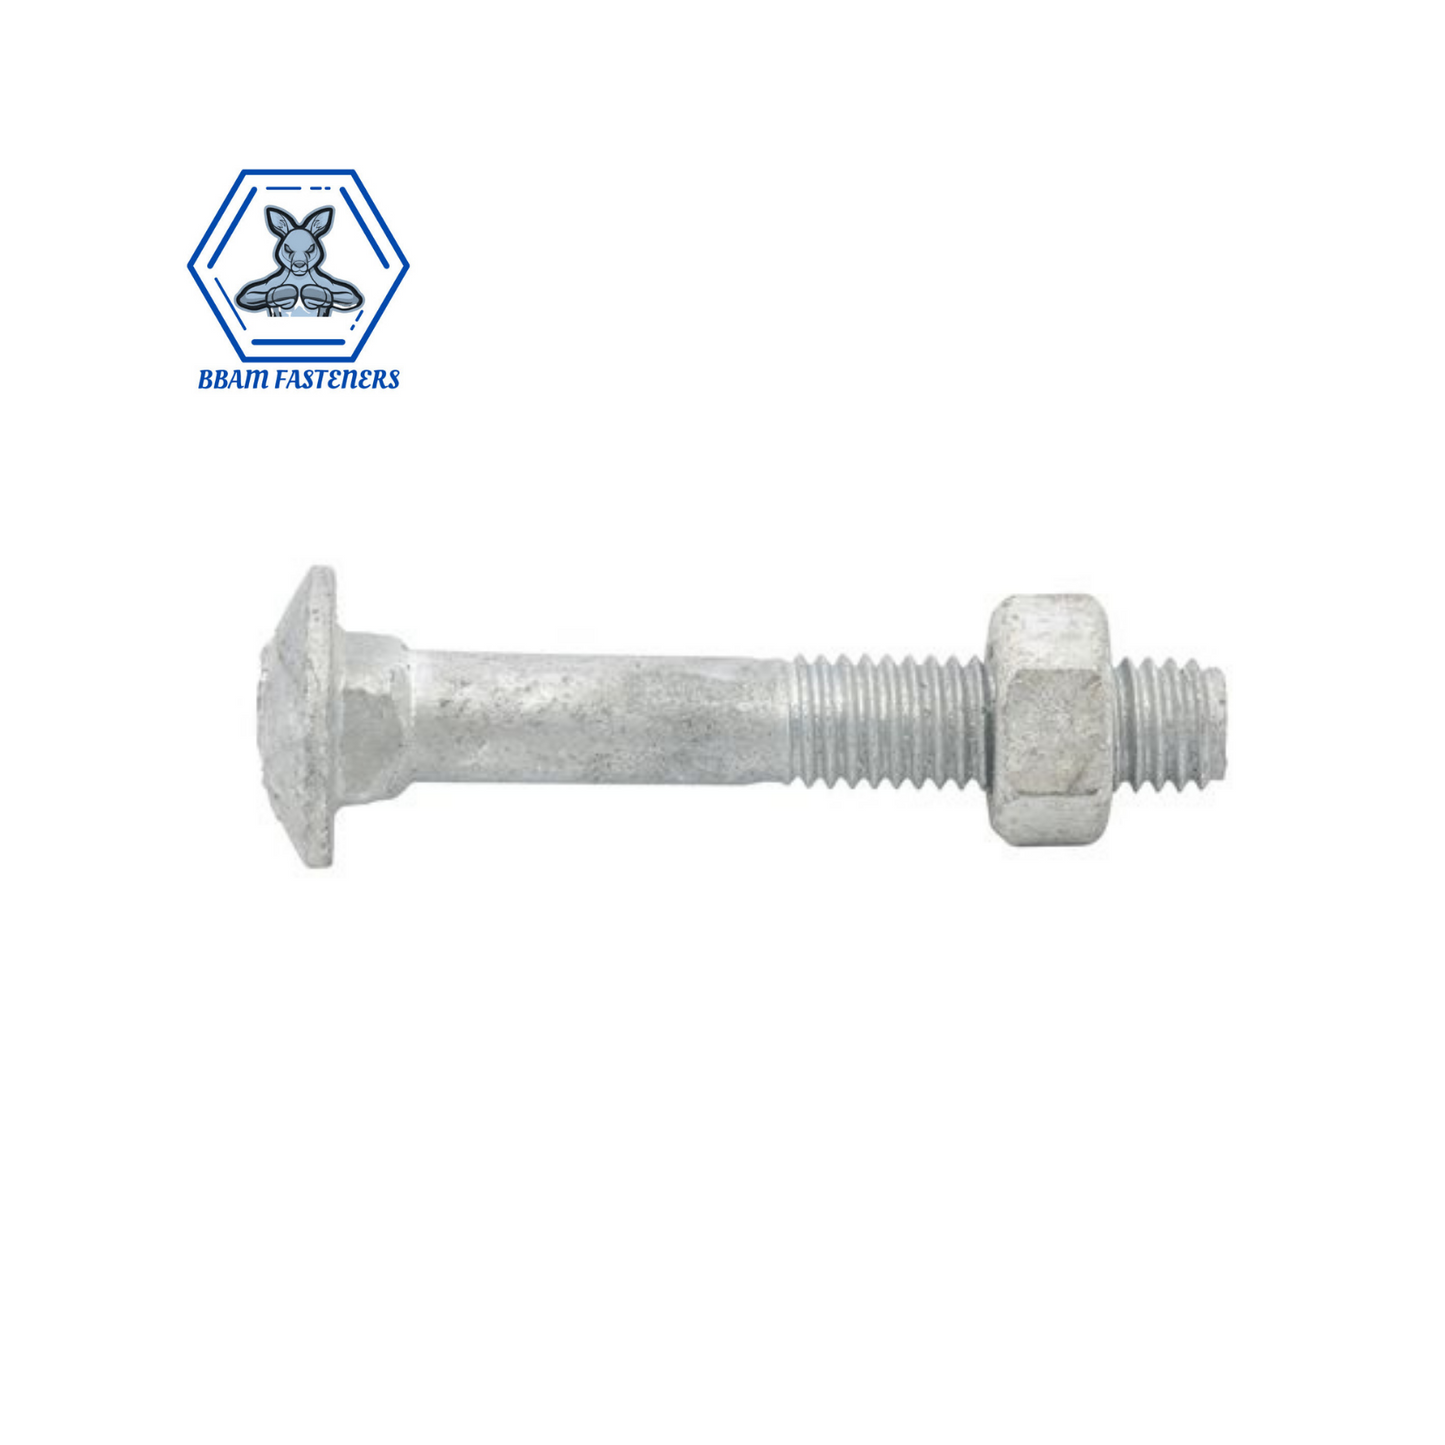 M10 x 200mm Cup Head Bolt & Nut Hot Dip Galvanised 2 Pack